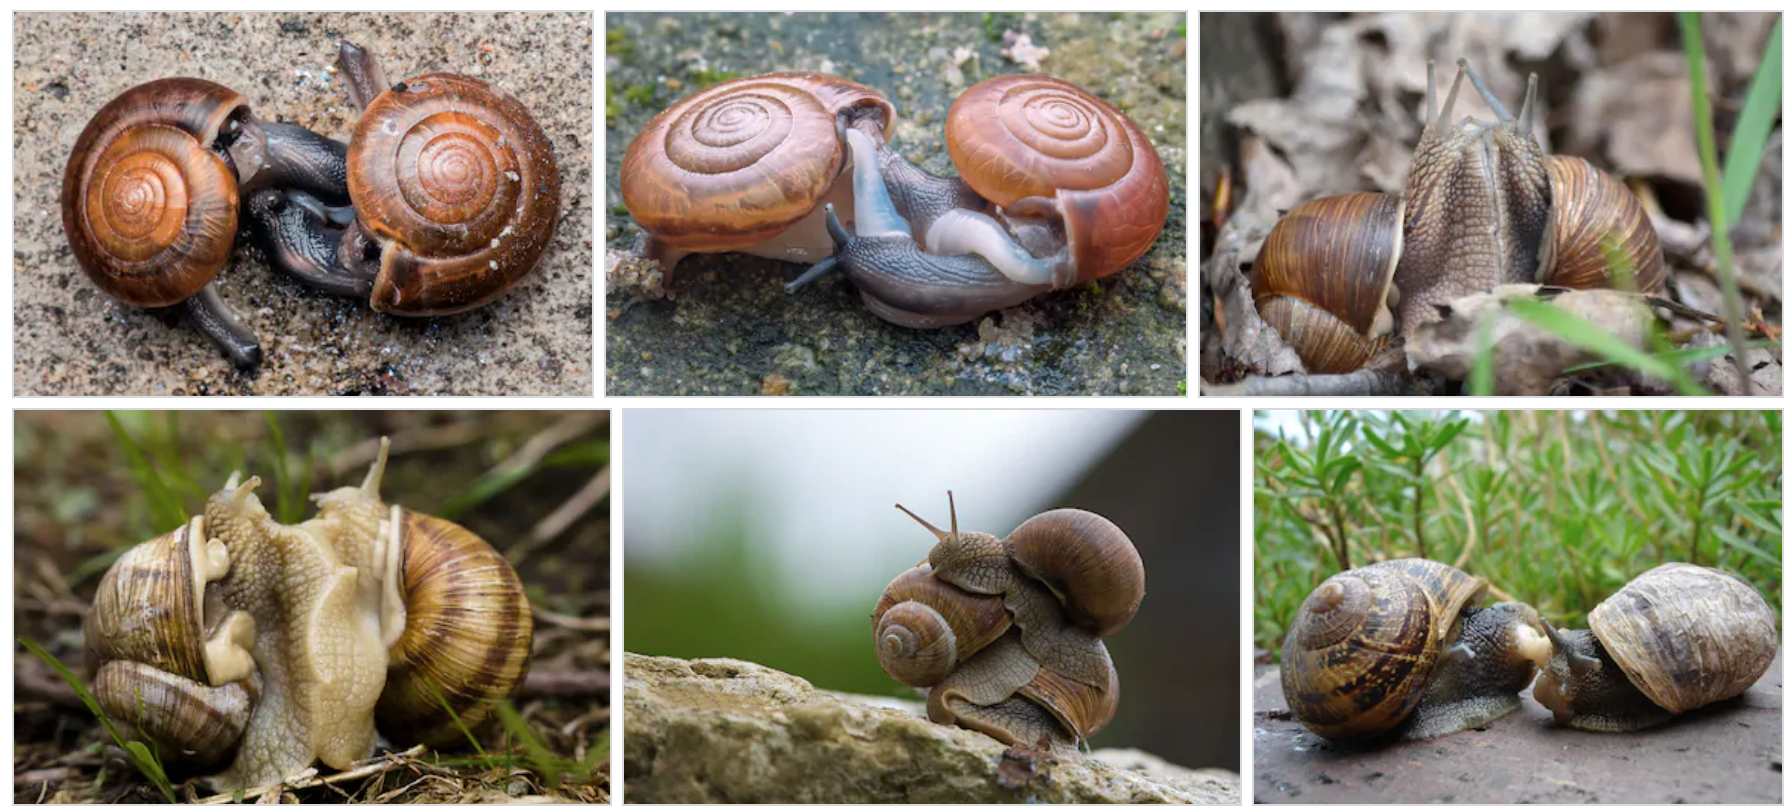 How many times do snails reproduce in a year?